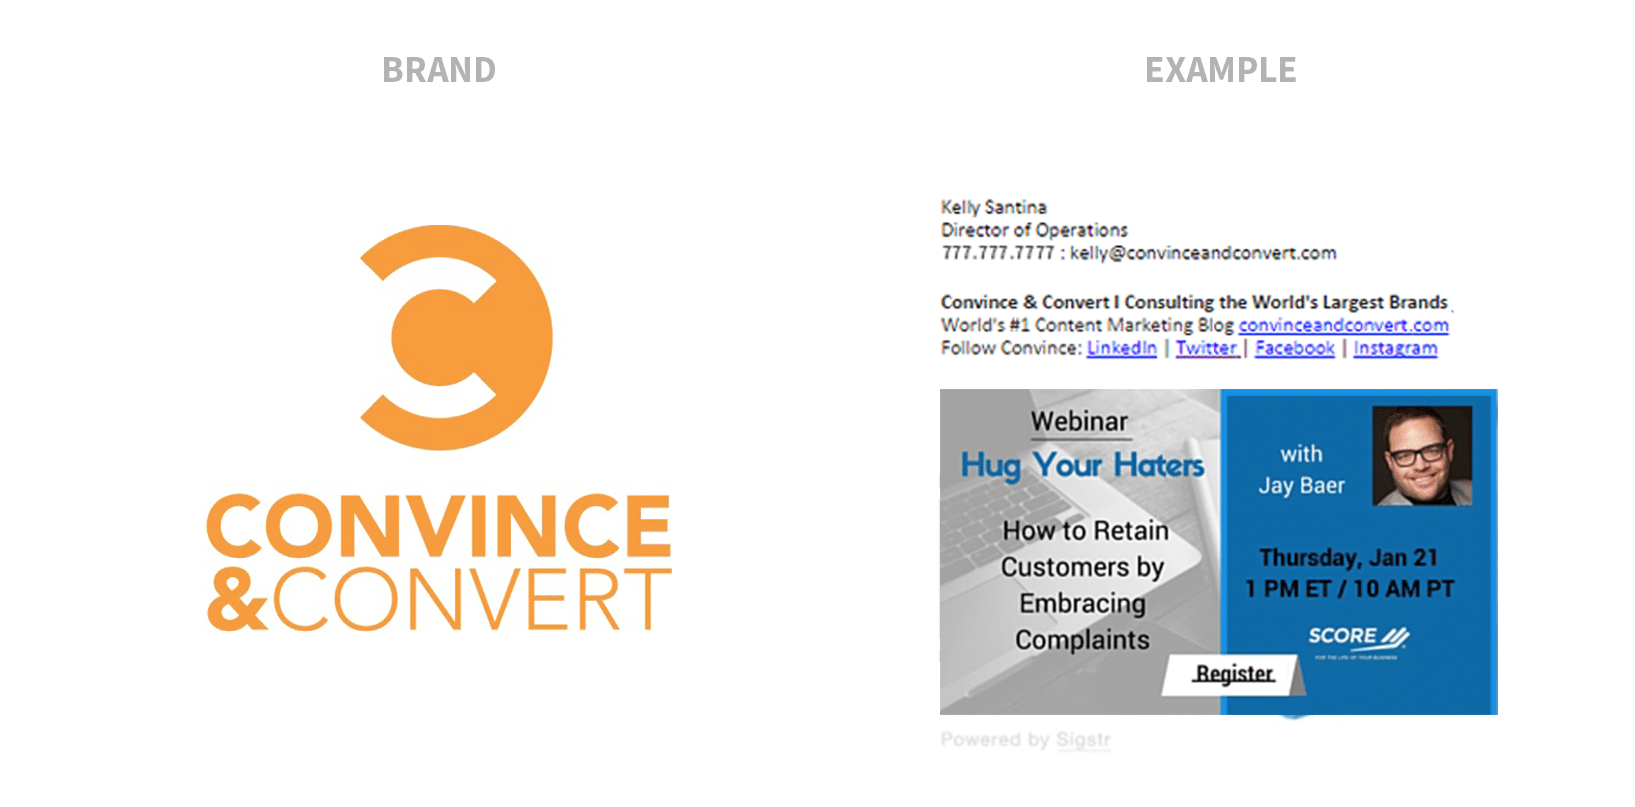 BusinessServicesExample_ConvinceConvert